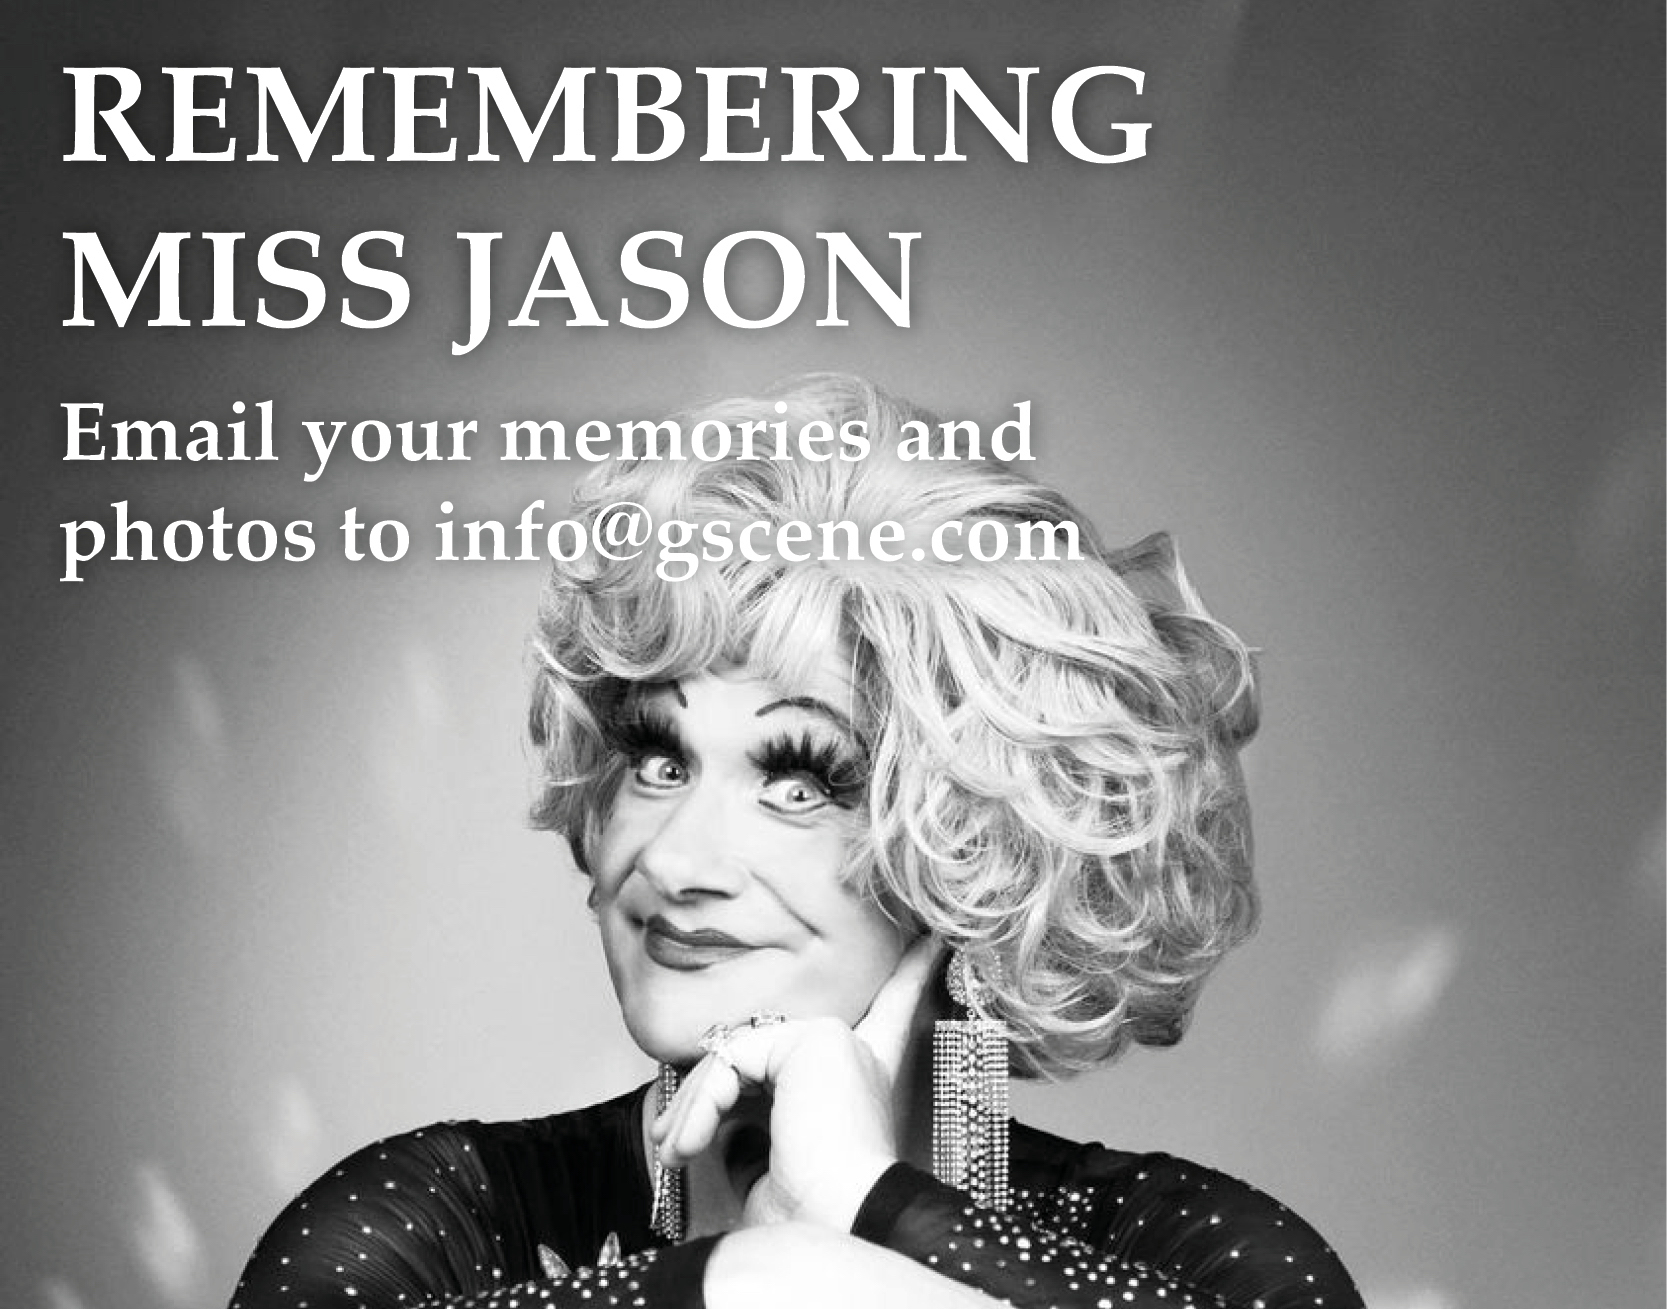 Scene to publish your memories of Miss Jason in May issue